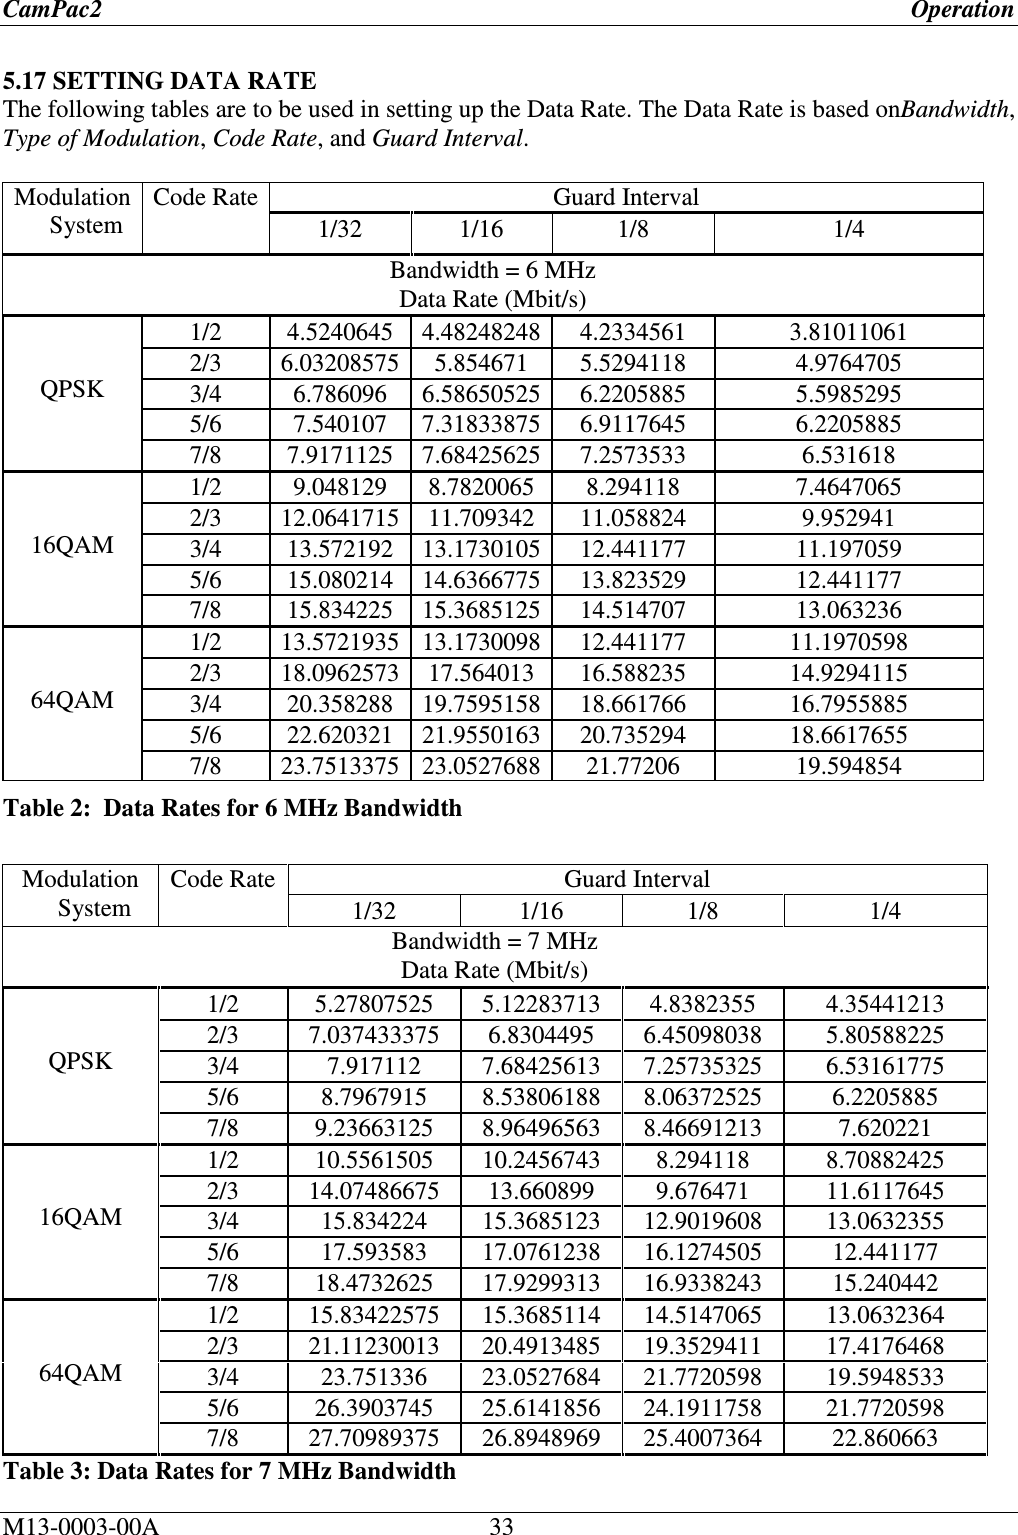 CamPac2      Operation M13-0003-00A     33  5.17 SETTING DATA RATE The following tables are to be used in setting up the Data Rate. The Data Rate is based onBandwidth, Type of Modulation, Code Rate, and Guard Interval.   Modulation System Code Rate Guard Interval  1/32  1/16  1/8  1/4 Bandwidth = 6 MHz                             Data Rate (Mbit/s)   QPSK 1/2  4.5240645  4.48248248 4.2334561  3.81011061 2/3  6.03208575 5.854671  5.5294118  4.9764705 3/4  6.786096  6.58650525 6.2205885  5.5985295 5/6  7.540107  7.31833875 6.9117645  6.2205885 7/8  7.9171125  7.68425625 7.2573533  6.531618   16QAM 1/2  9.048129  8.7820065  8.294118  7.4647065 2/3  12.0641715 11.709342  11.058824  9.952941 3/4  13.572192  13.1730105 12.441177  11.197059 5/6  15.080214  14.6366775 13.823529  12.441177 7/8  15.834225  15.3685125 14.514707  13.063236   64QAM 1/2  13.5721935 13.1730098 12.441177  11.1970598 2/3  18.0962573 17.564013  16.588235  14.9294115 3/4  20.358288  19.7595158 18.661766  16.7955885 5/6  22.620321  21.9550163 20.735294  18.6617655 7/8  23.7513375 23.0527688 21.77206  19.594854 Table 2:  Data Rates for 6 MHz Bandwidth  Modulation System Code Rate Guard Interval  1/32  1/16  1/8  1/4 Bandwidth = 7 MHz                            Data Rate (Mbit/s)   QPSK 1/2  5.27807525  5.12283713  4.8382355  4.35441213 2/3  7.037433375  6.8304495  6.45098038  5.80588225 3/4  7.917112  7.68425613  7.25735325  6.53161775 5/6  8.7967915  8.53806188  8.06372525  6.2205885 7/8  9.23663125  8.96496563  8.46691213  7.620221   16QAM 1/2  10.5561505  10.2456743  8.294118  8.70882425 2/3  14.07486675  13.660899  9.676471  11.6117645 3/4  15.834224  15.3685123  12.9019608  13.0632355 5/6  17.593583  17.0761238  16.1274505  12.441177 7/8  18.4732625  17.9299313  16.9338243  15.240442   64QAM 1/2  15.83422575  15.3685114  14.5147065  13.0632364 2/3  21.11230013  20.4913485  19.3529411  17.4176468 3/4  23.751336  23.0527684  21.7720598  19.5948533 5/6  26.3903745  25.6141856  24.1911758  21.7720598 7/8  27.70989375  26.8948969  25.4007364  22.860663 Table 3: Data Rates for 7 MHz Bandwidth 